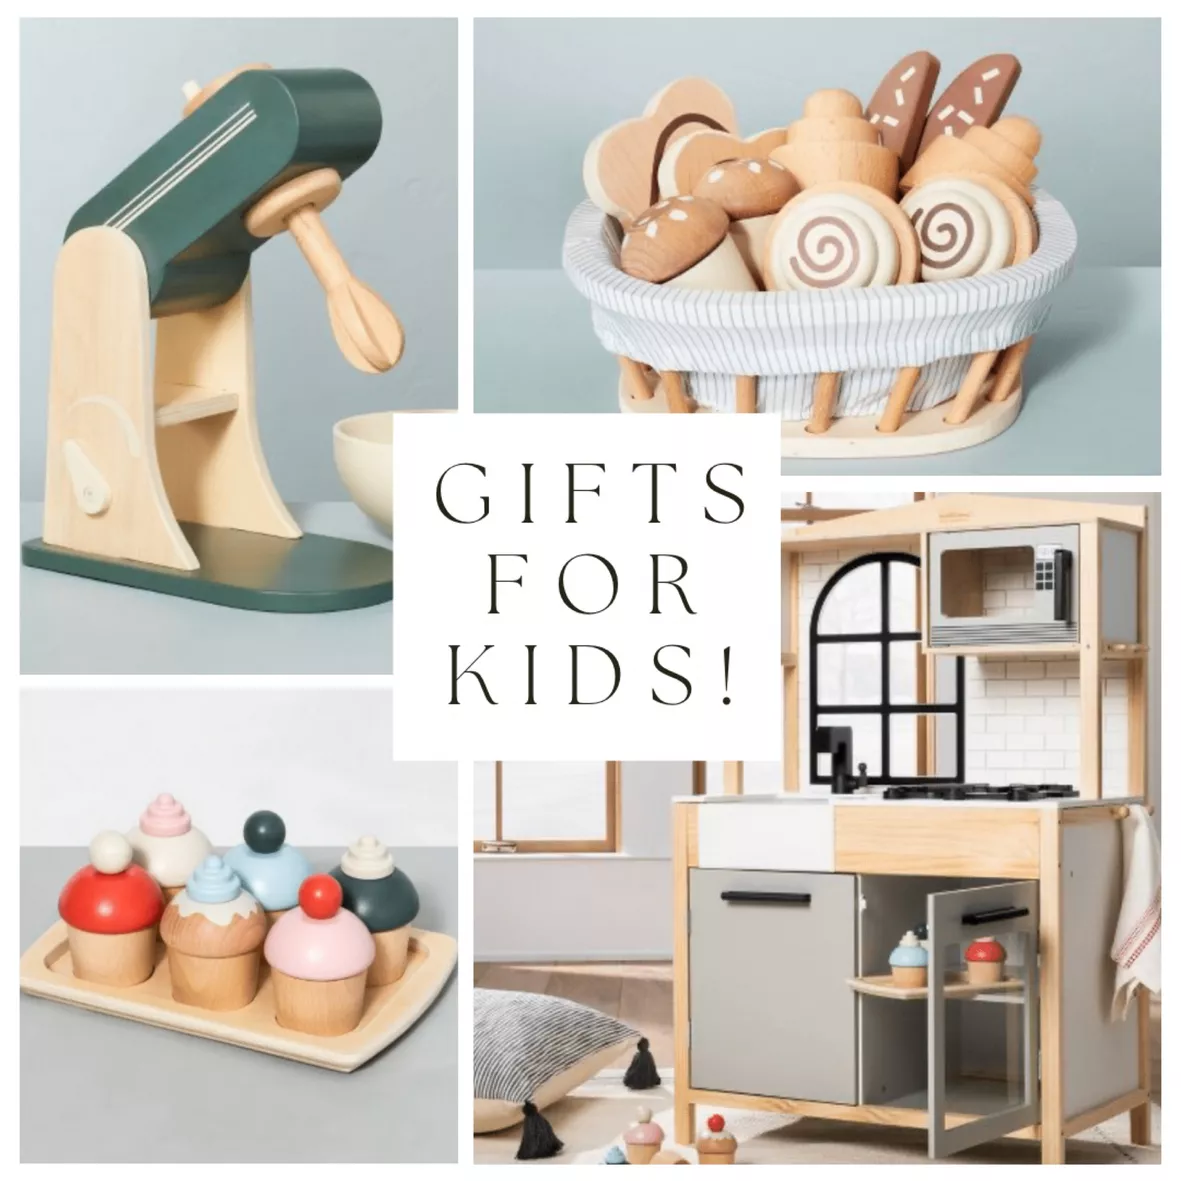 Wooden Toy Kitchen Mixer - Hearth & Hand with Magnolia